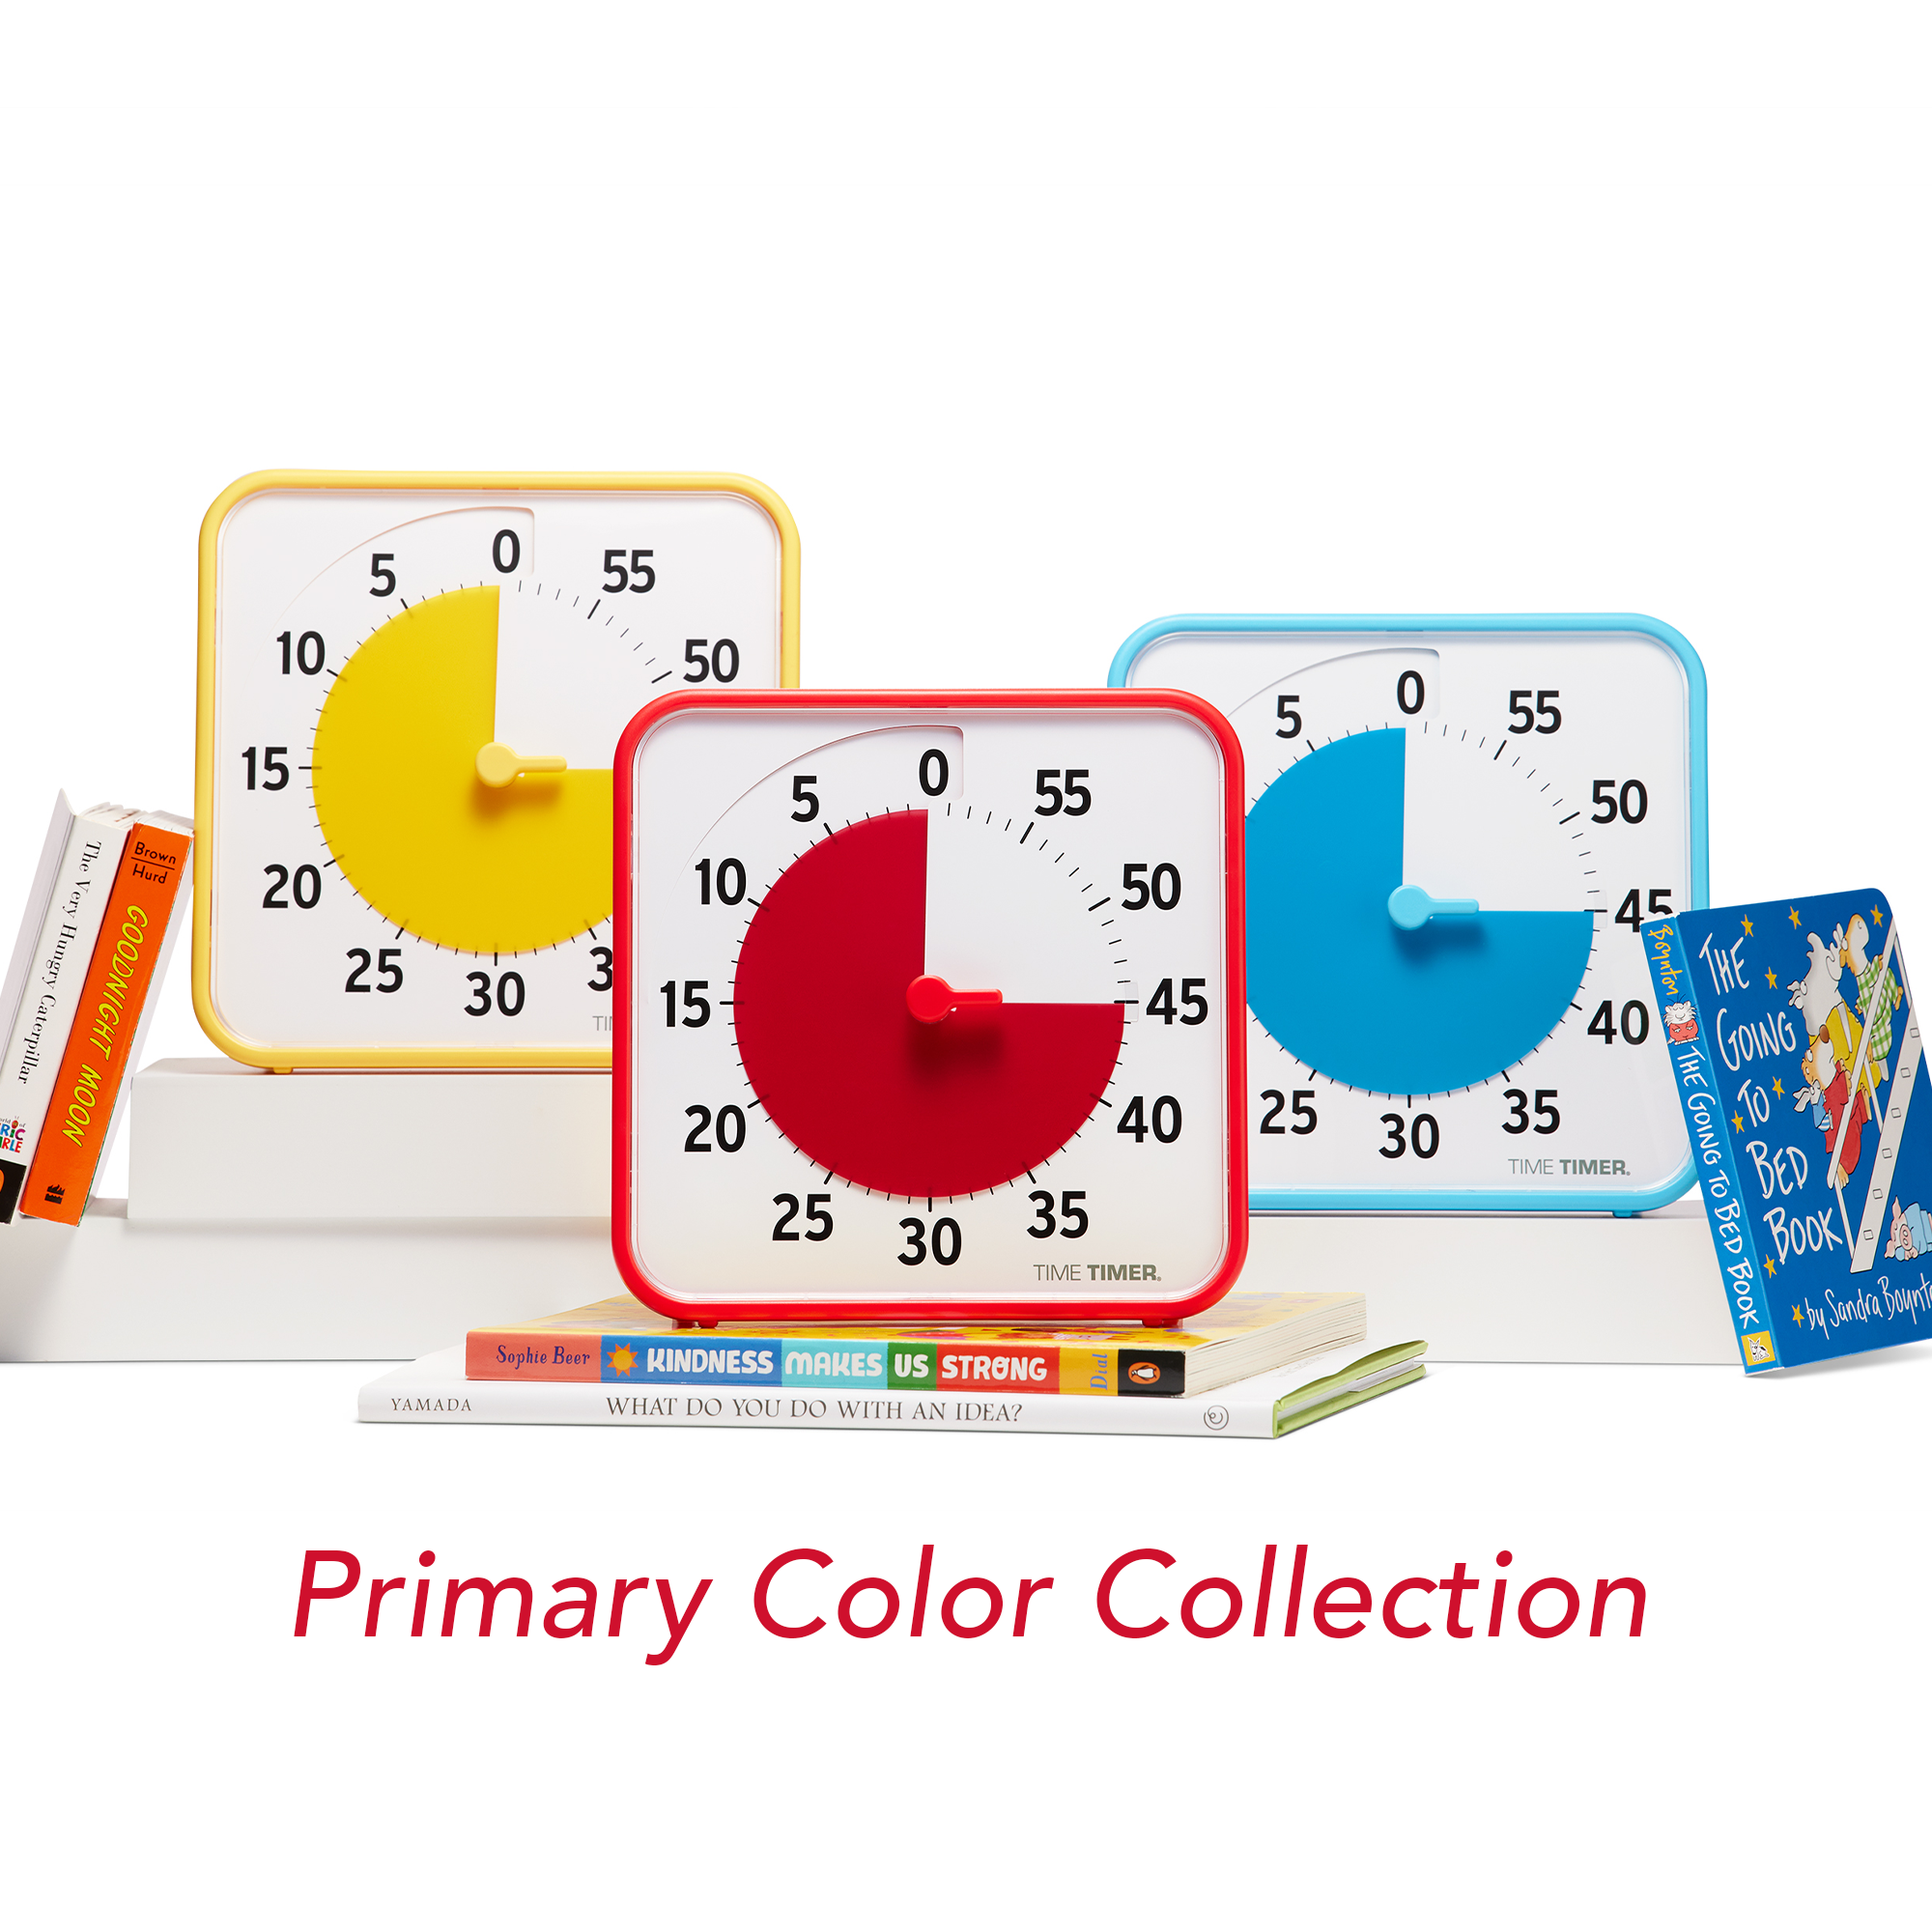 Primary color collection  - Time Timer® Original 8” - Learning Center Classroom Set (Set of 3)